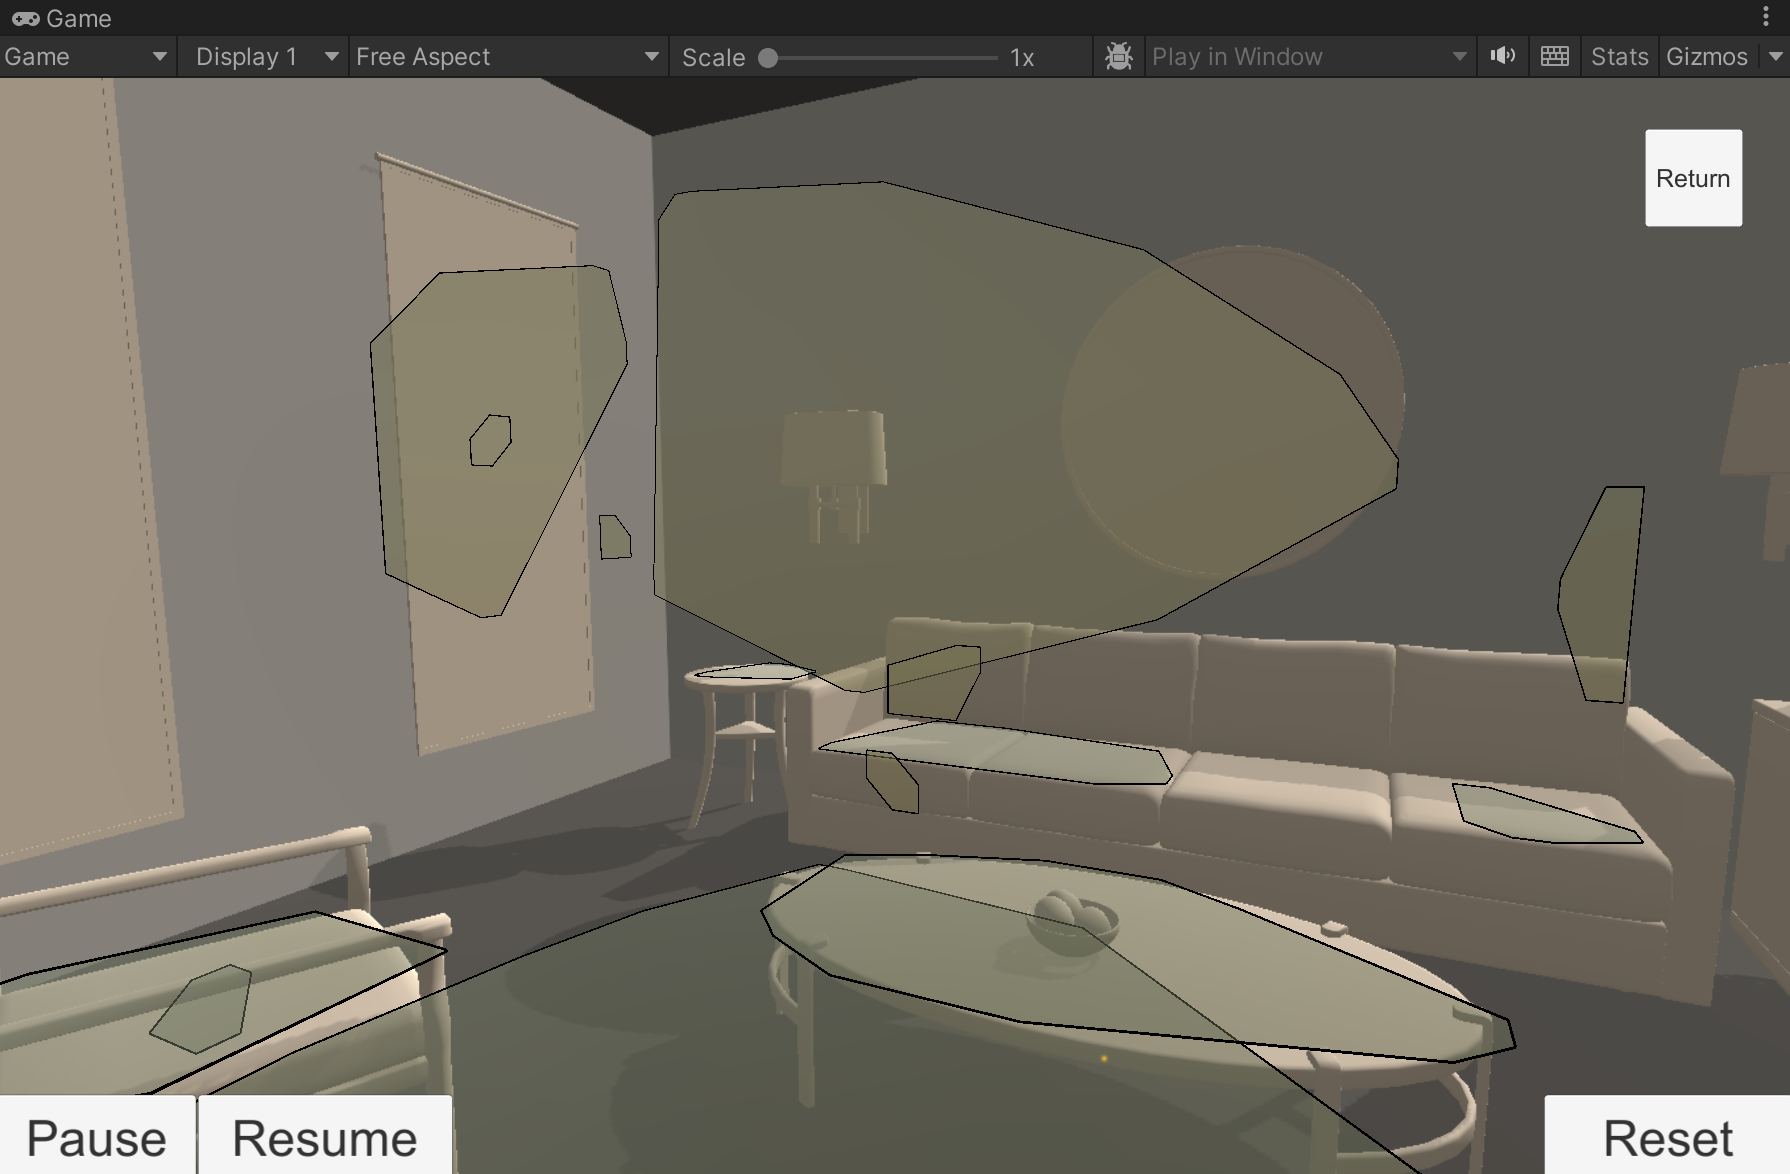 The Game view shows a living room scene where the Simple AR sample scene is running via XR Simulation. Some planes have been detected in the living room environment and are visualized onscreen.